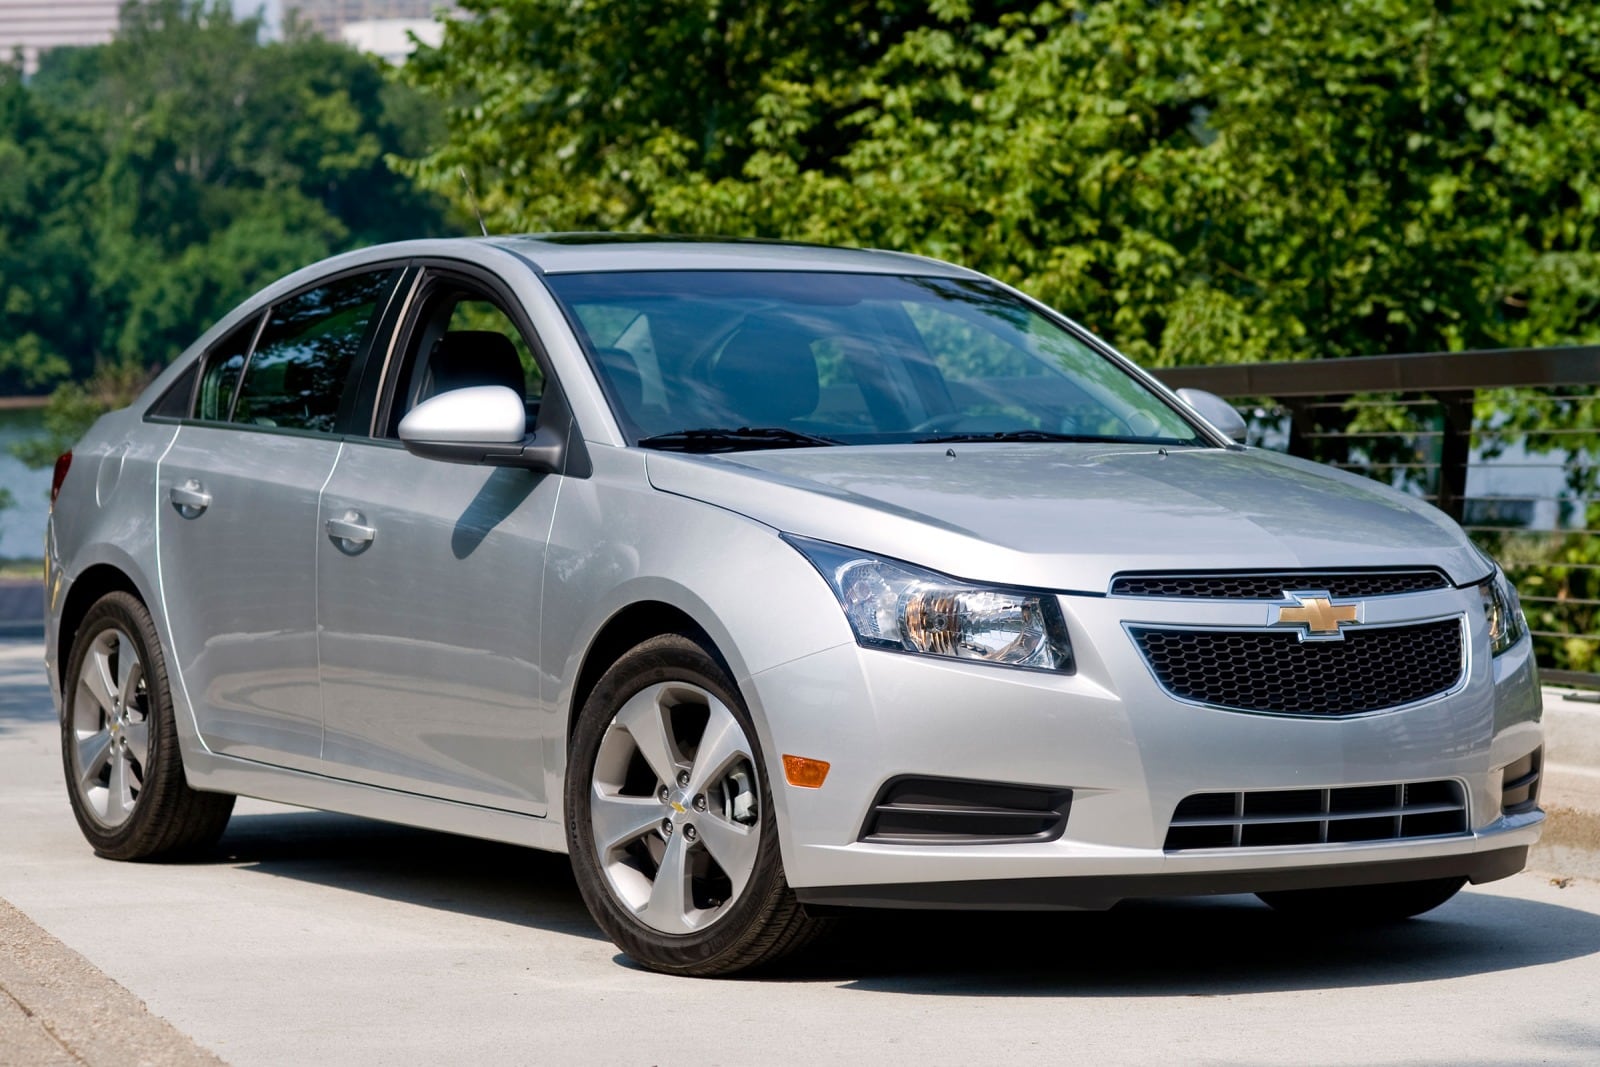 2014 Chevy Cruze Review & Ratings | Edmunds